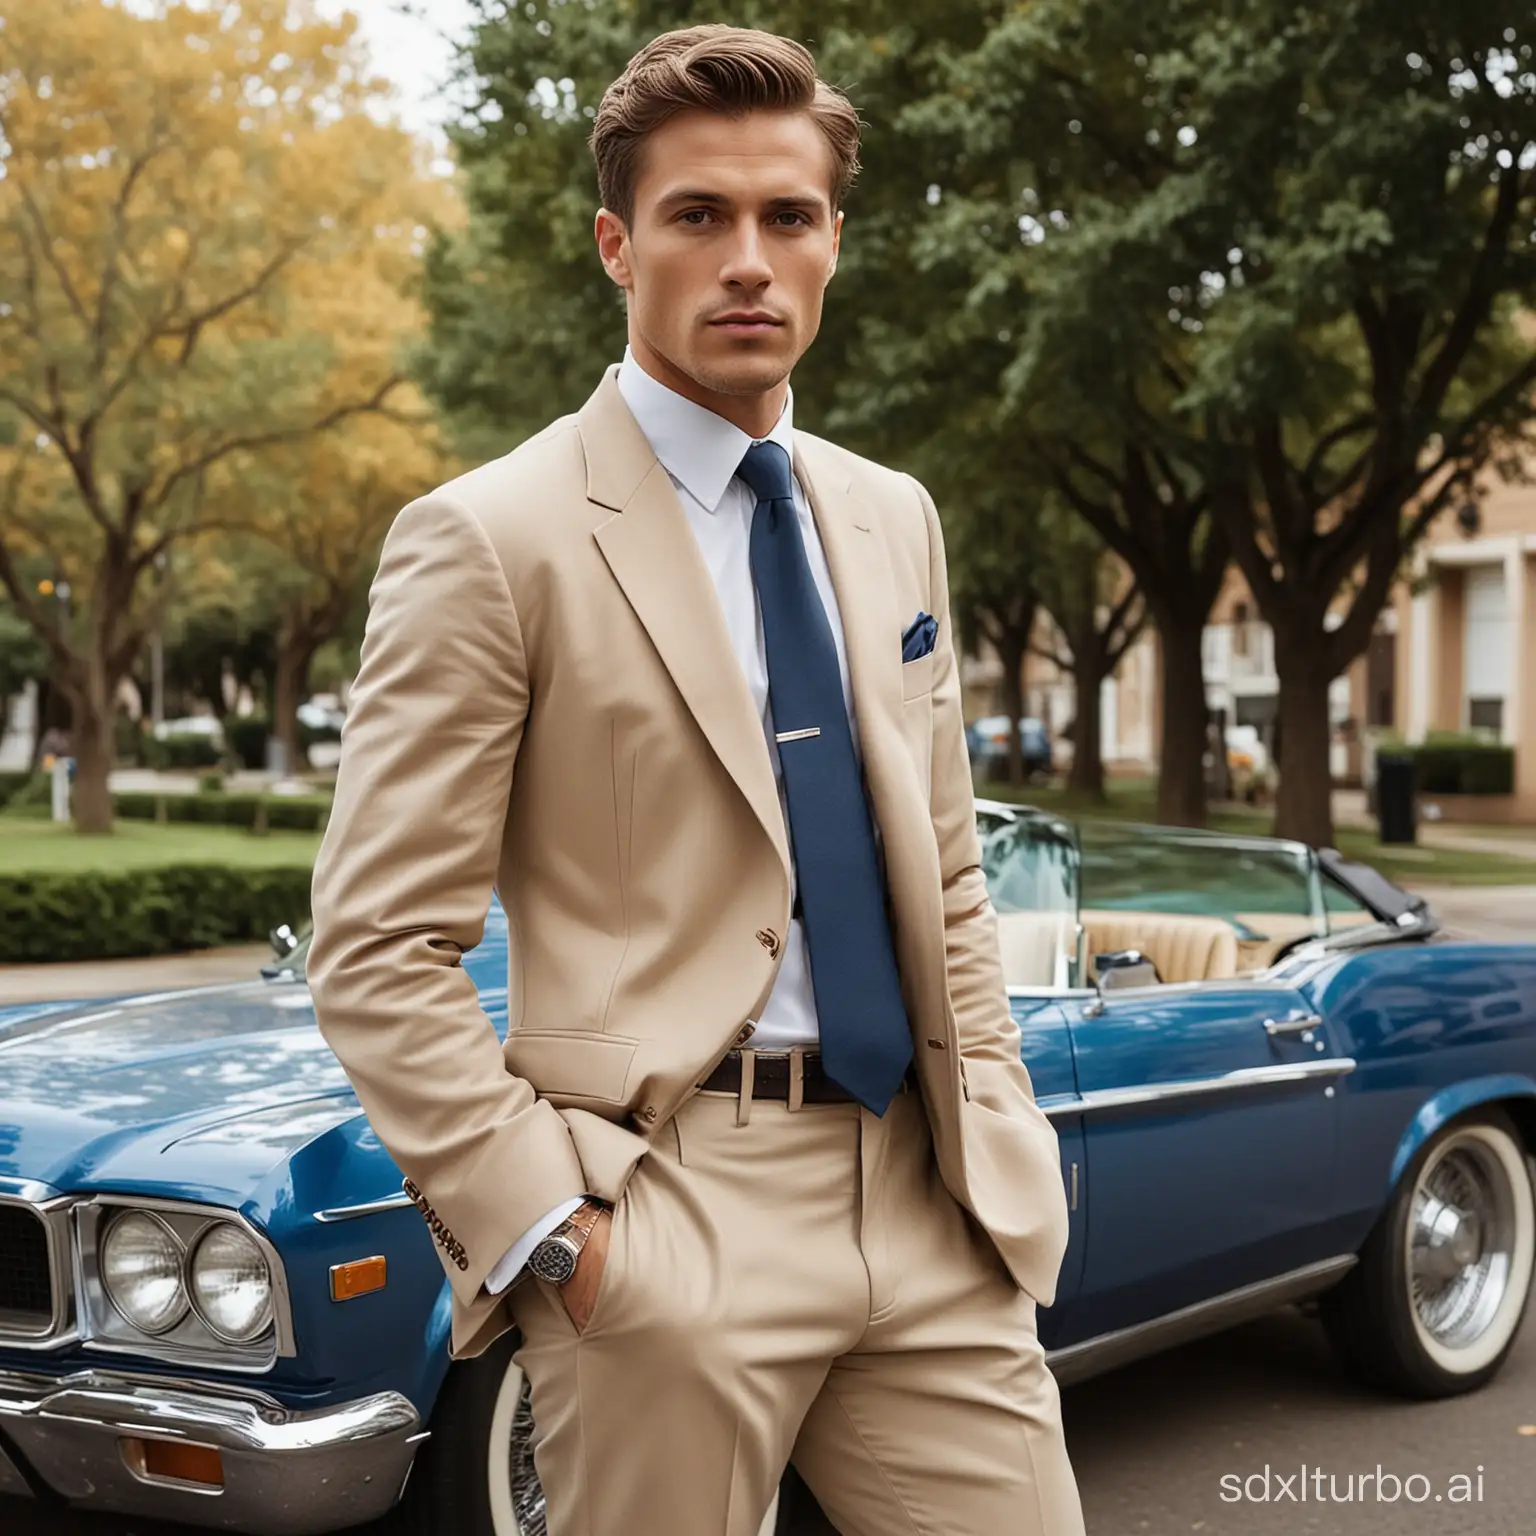 A man is captured in a photograph wearing a sophisticated tan suit paired with a crisp white shirt and a stylish blue tie. The man appears to be in his late twenties and exudes a sense of confidence. He is standing on a street, surrounded by some trees in the background. Additionally, the image also includes a black car on the left side and a silver car on the right side. The man's outfit is complemented by a sleek belt and a classic watch on his wrist. The overall color palette of the image consists of soft neutrals like tan, blue, and black, creating a timeless and elegant aesthetic.